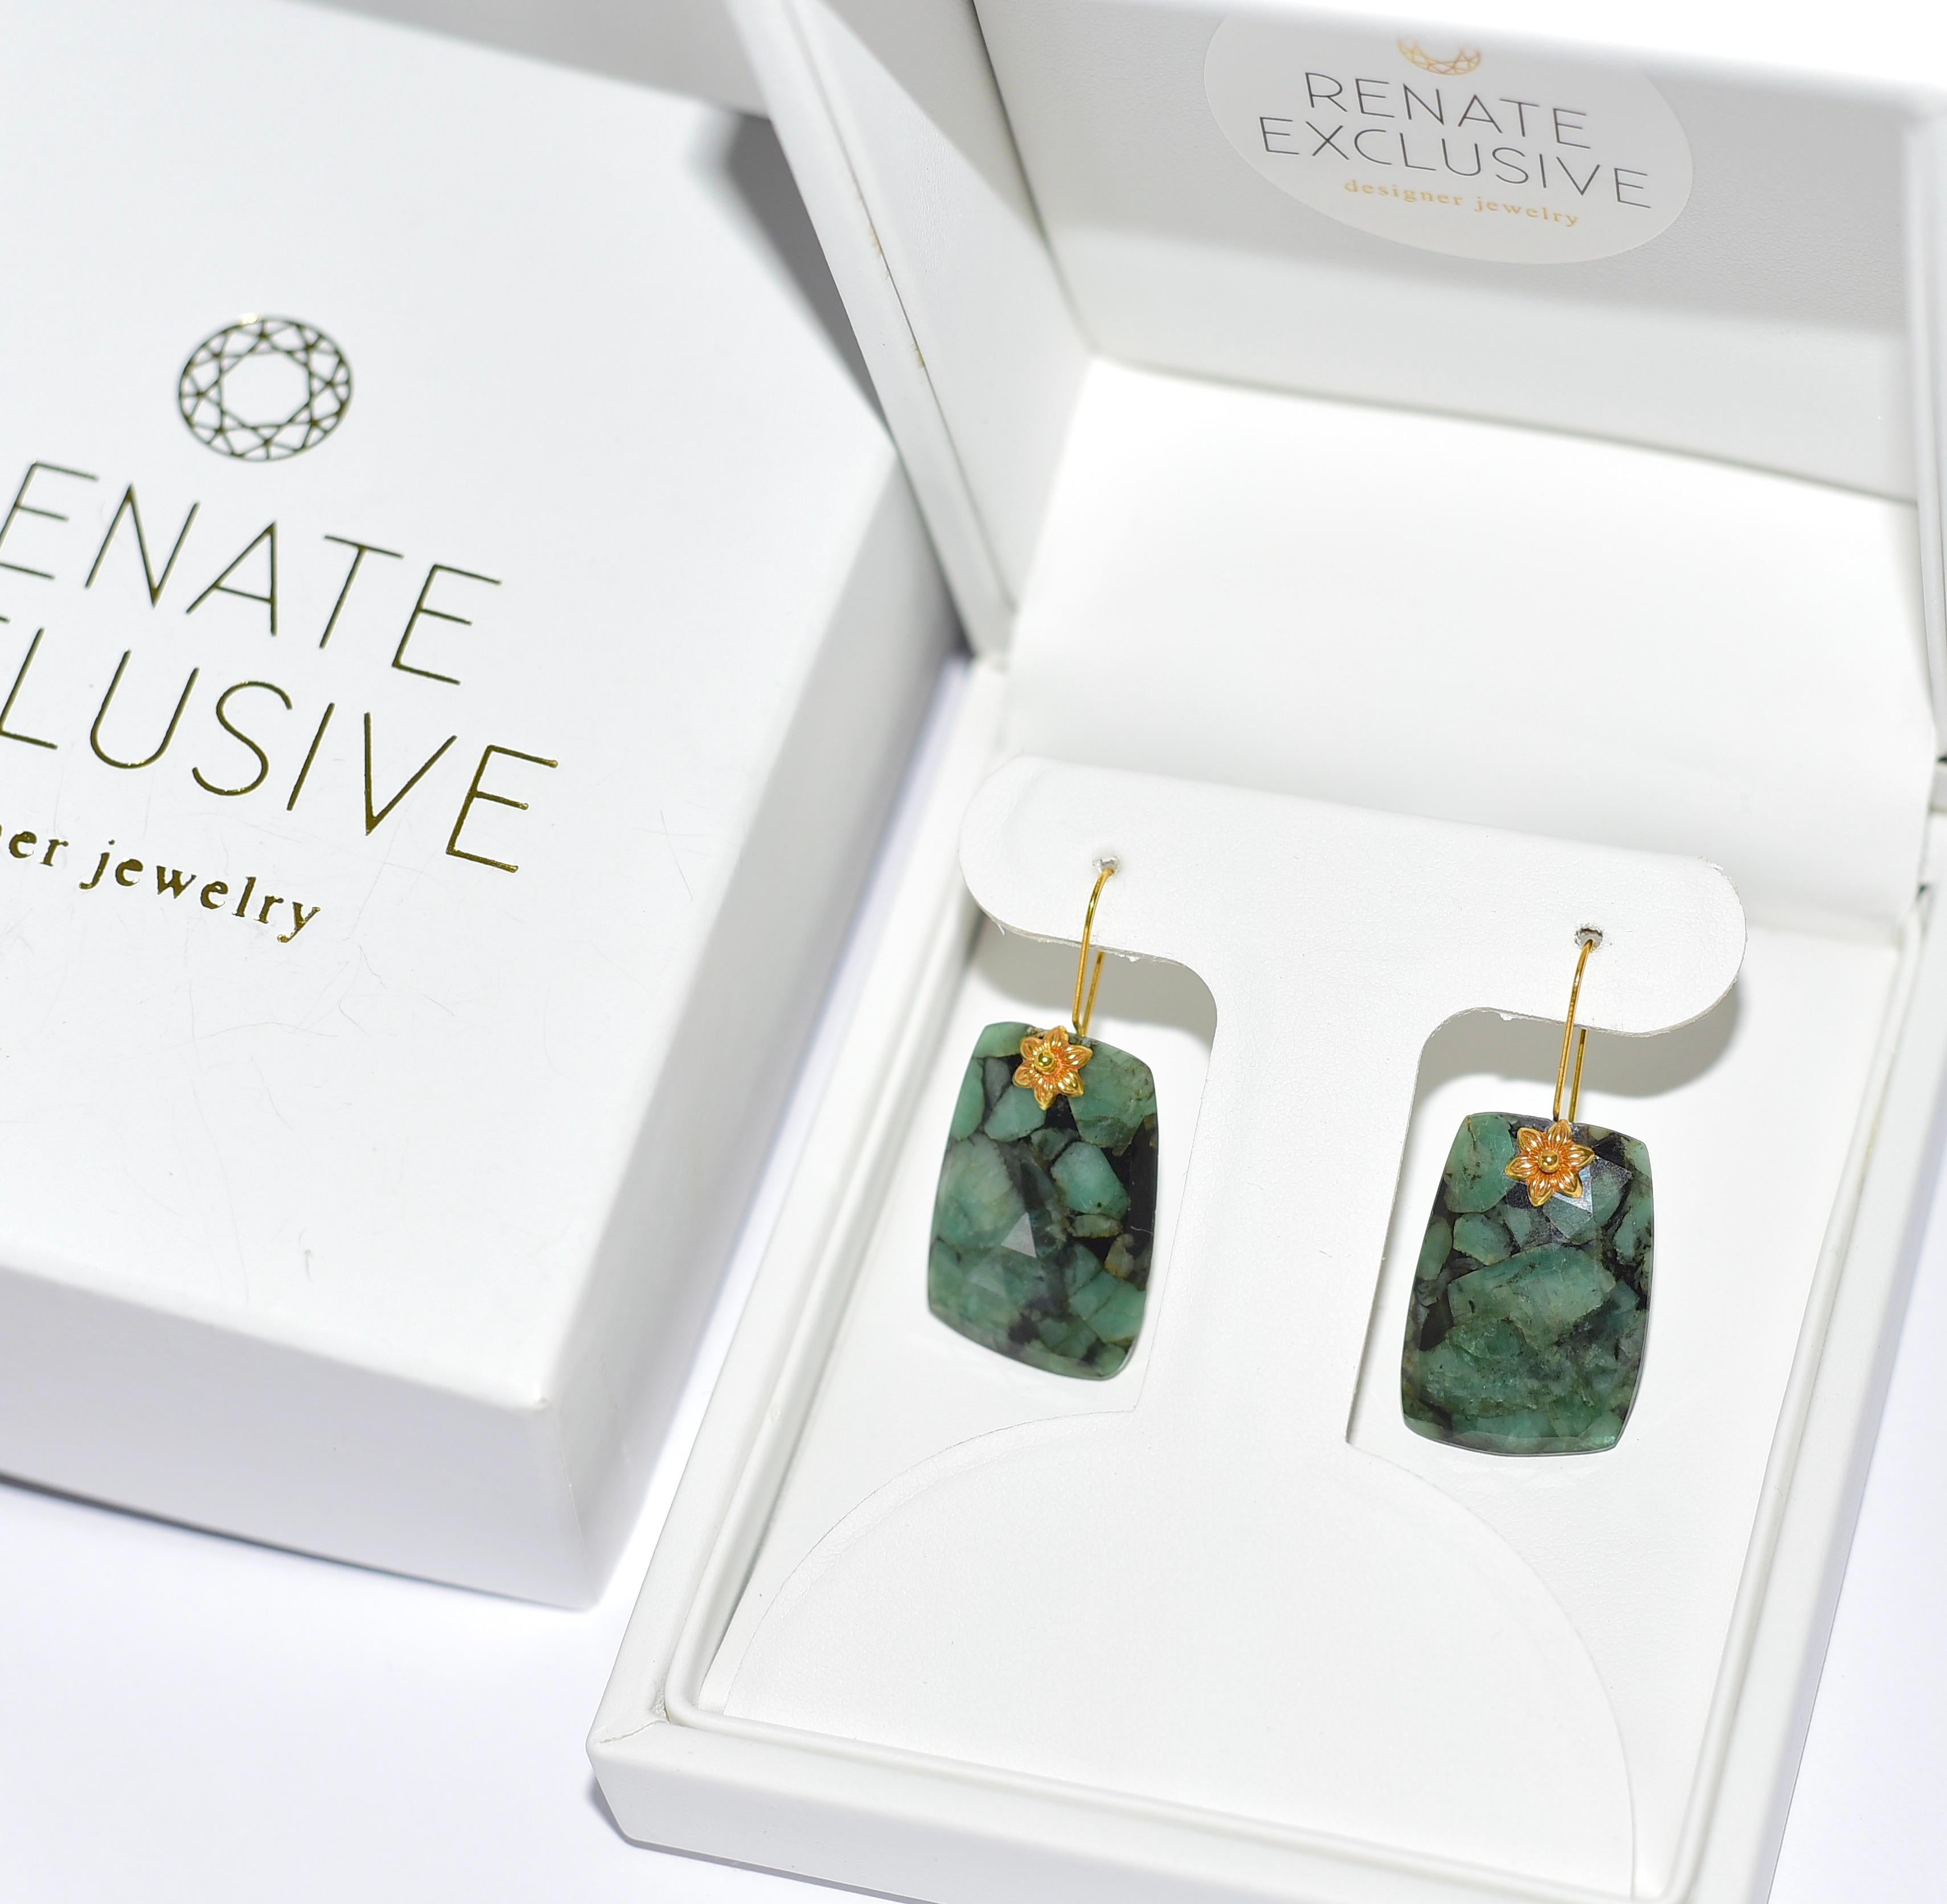 This is an untreated and impressive size pair of Zambian emerald in a lovely mix of semi-translucent hunter green with bold black mottling for a striking look. They are an asymmetrical rectangle shape.  The earrings look opulent the deep green color